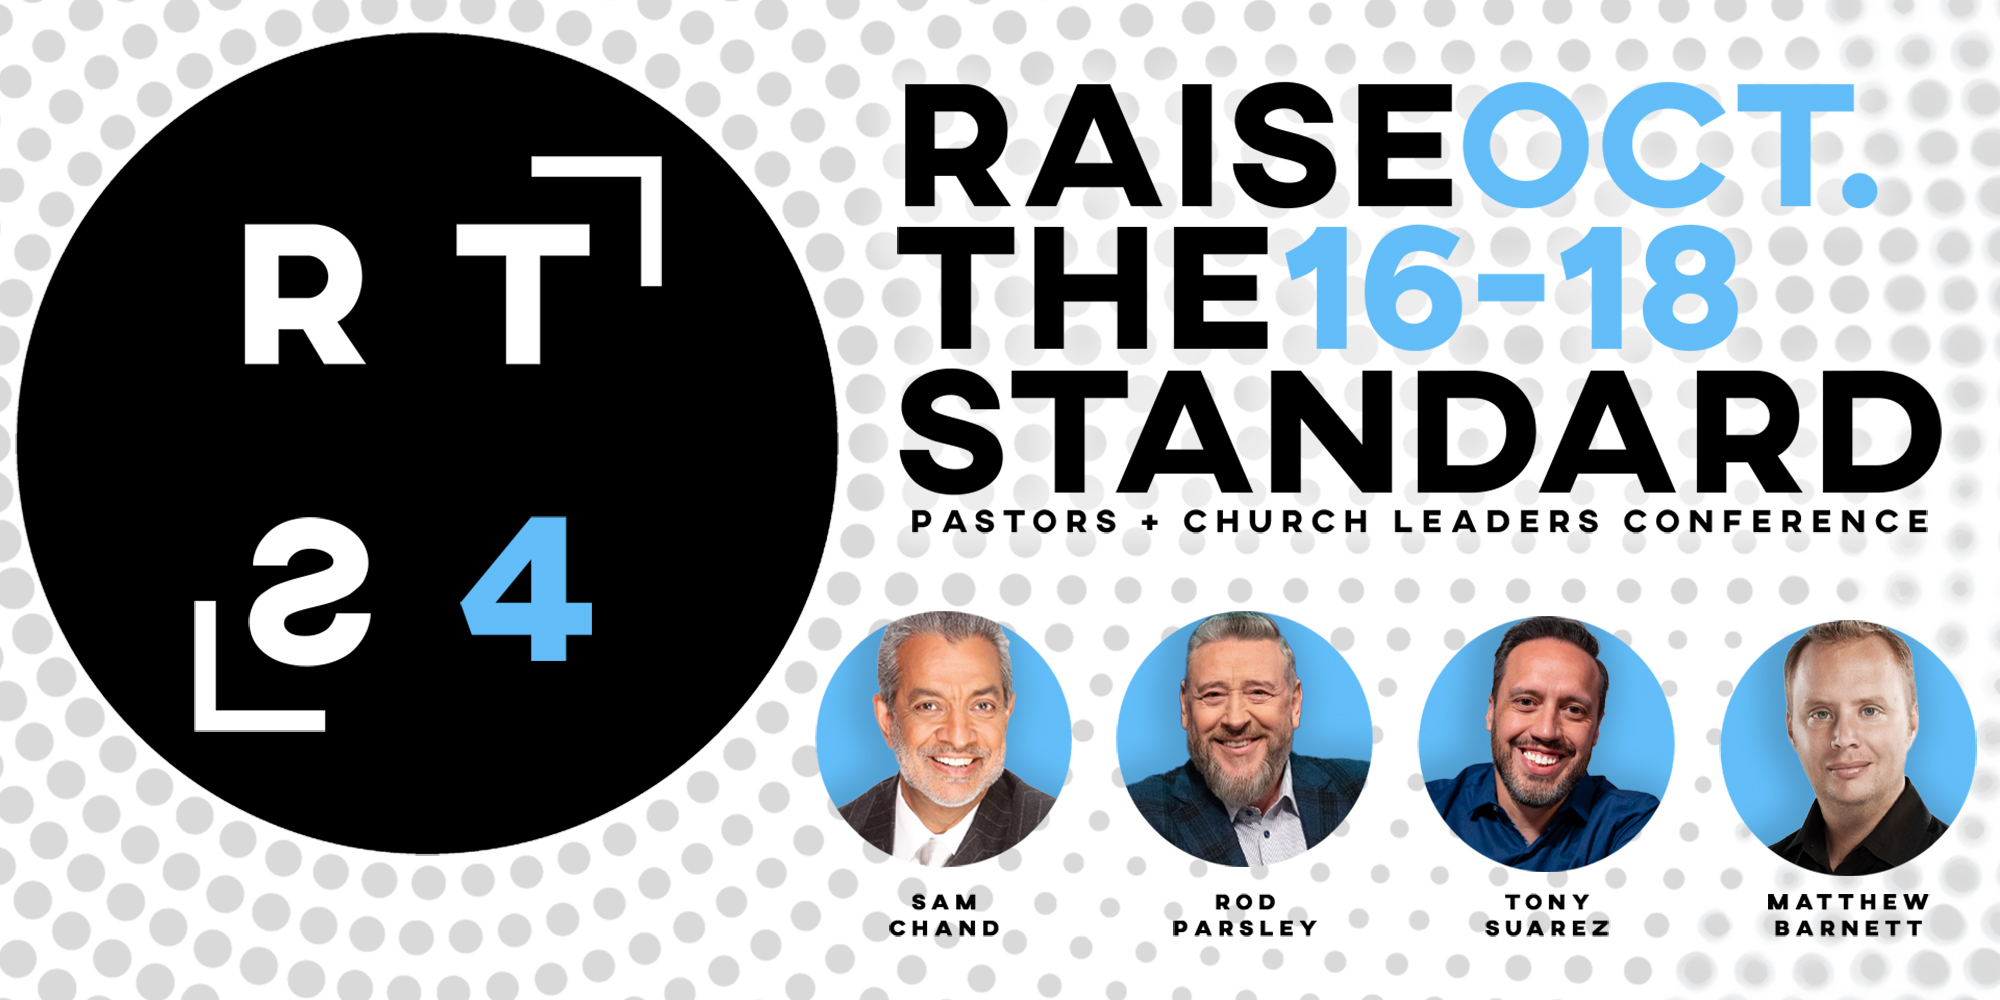 Raise the Standard October 16-18 Pastors + Church Leaders Conference